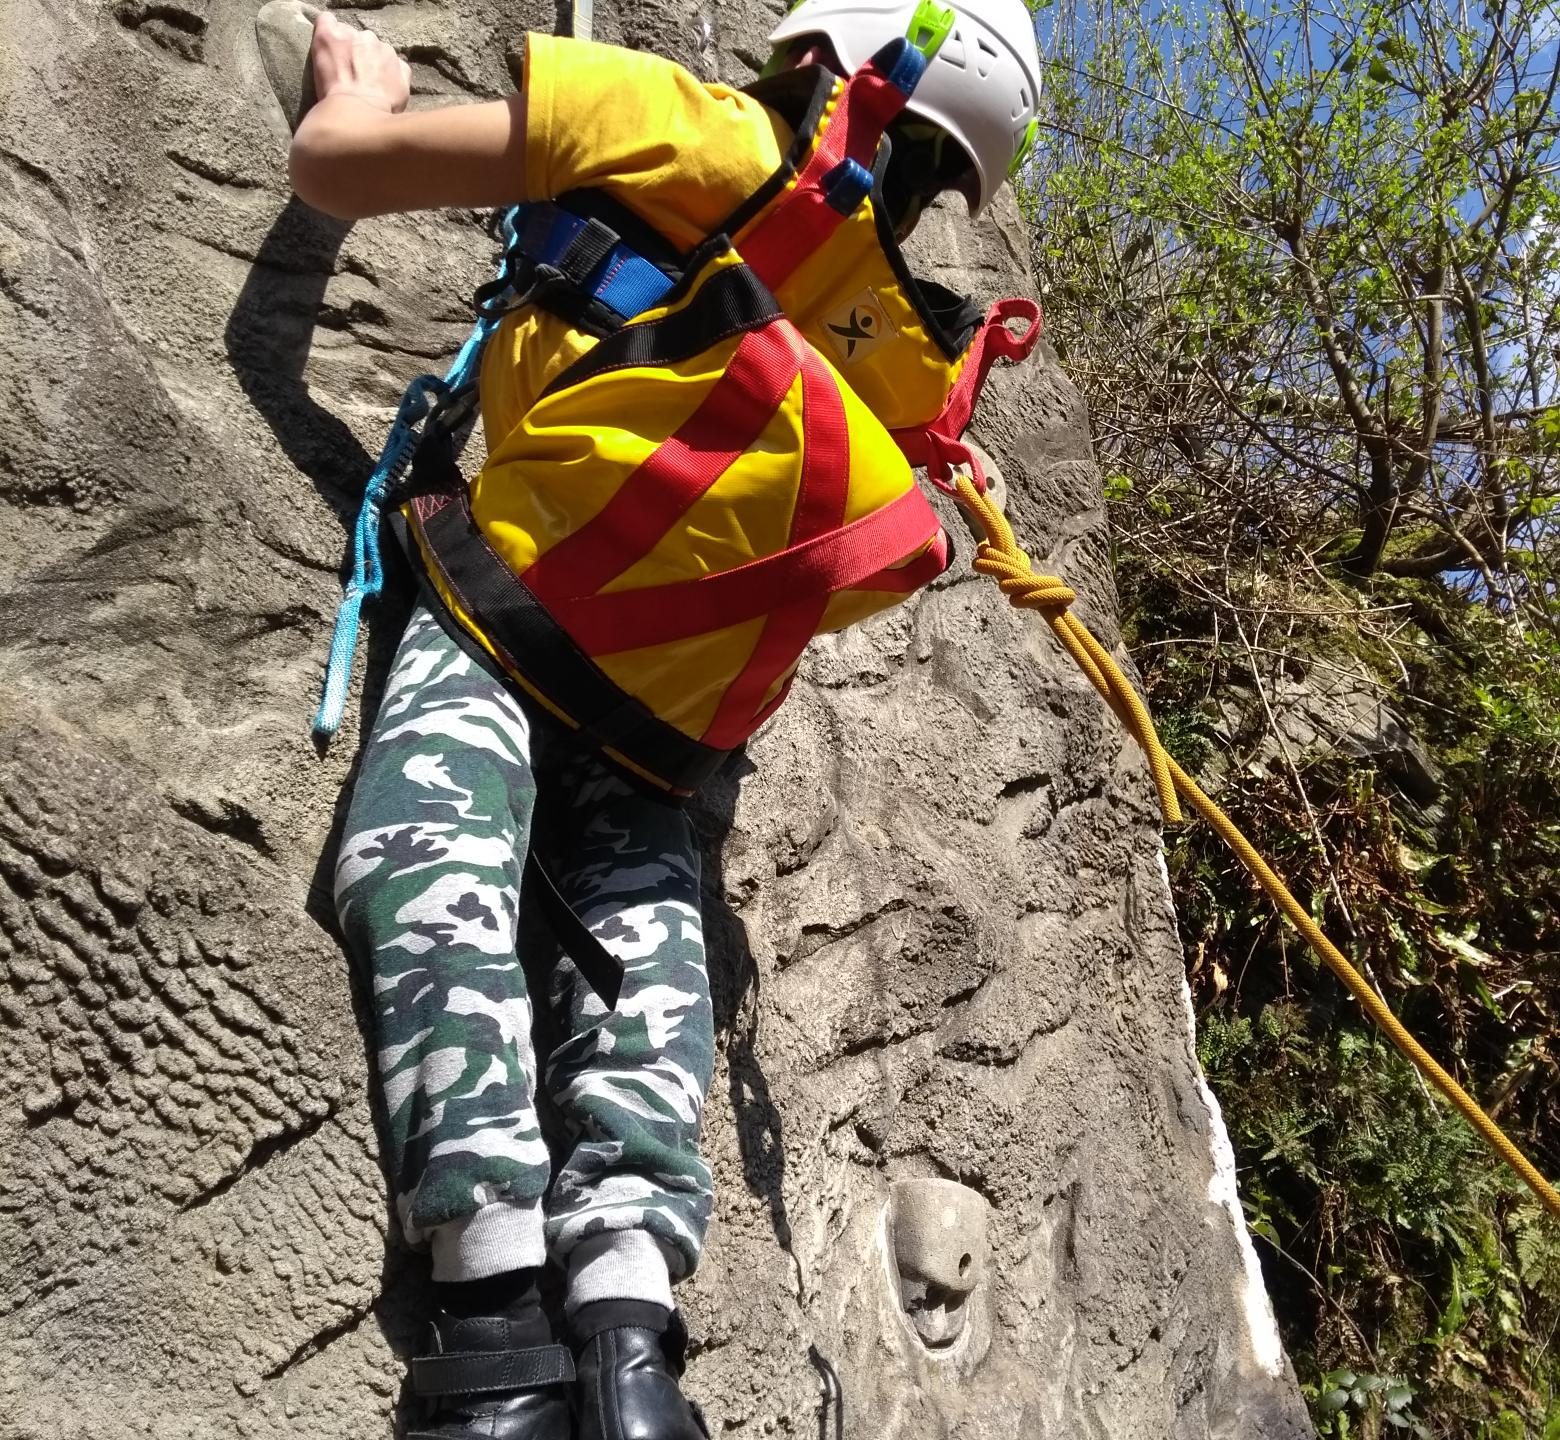 A guest is suspended by ropes on the outdoor climbing wall, wearing a yellow sling. His legs are hanging down below him in camouflage trousers.